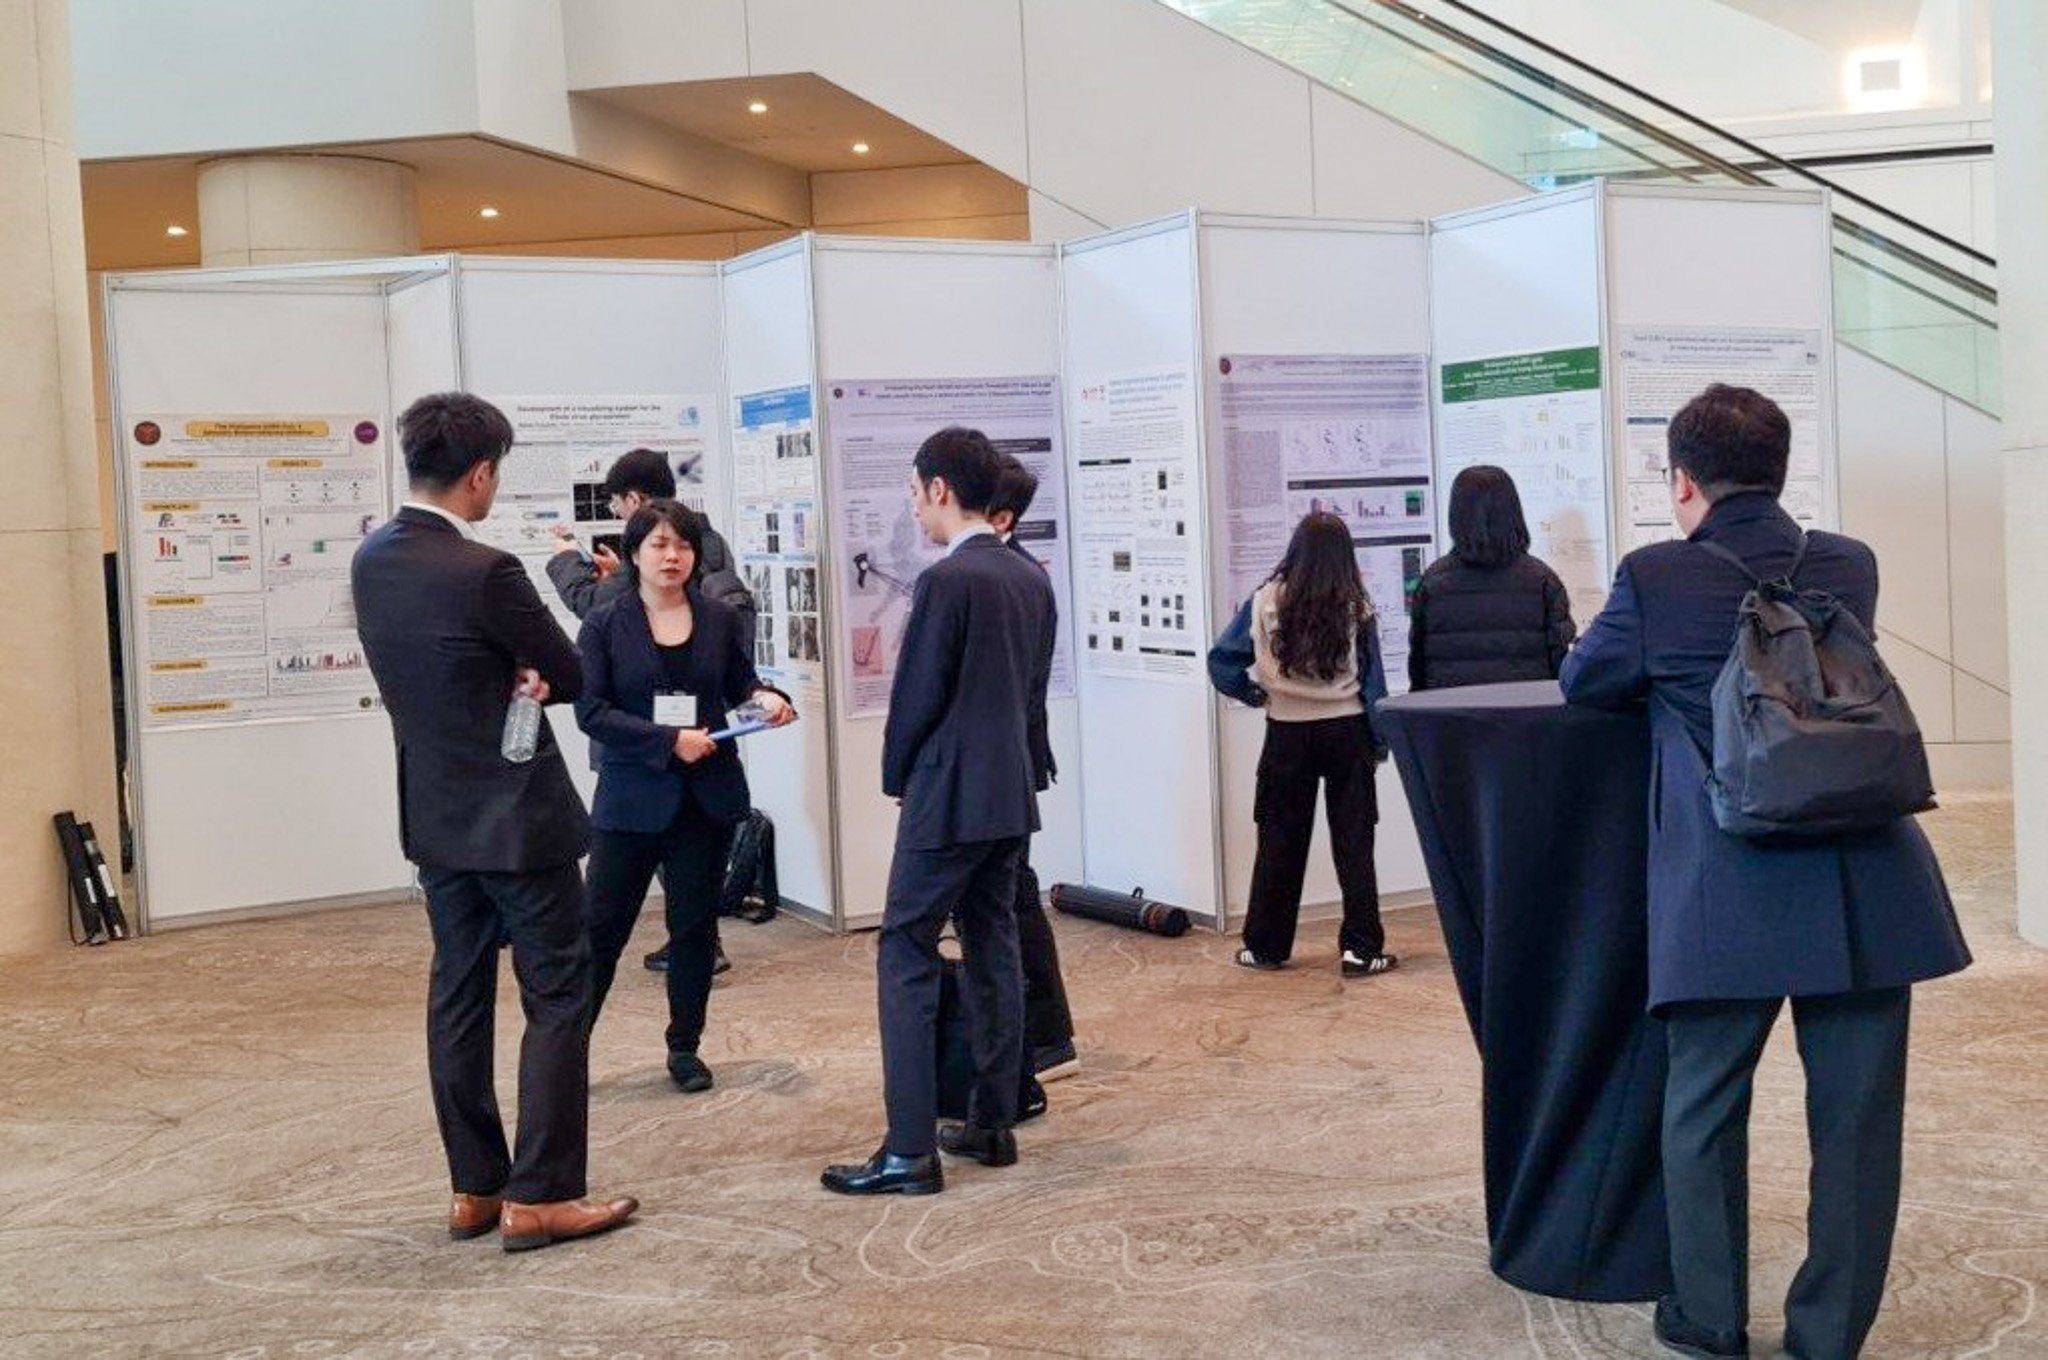 PGC poster presentations at the USJCMSP’s 24th EID Conference in Incheon, Korea